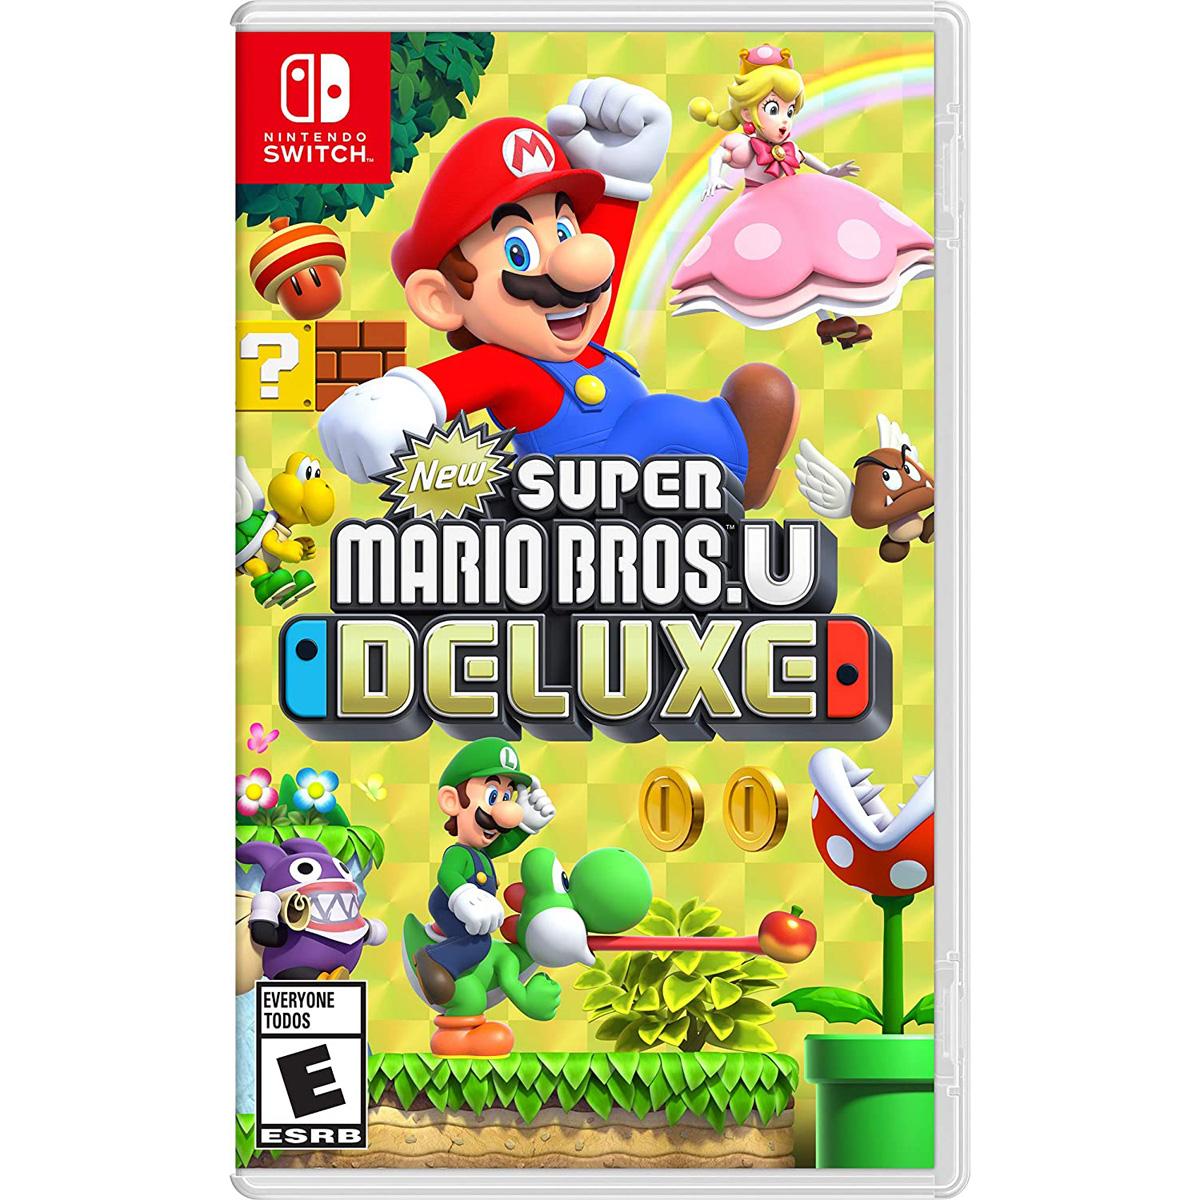 New Super Mario Bros U Deluxe Nintendo Switch for $26.99 Shipped